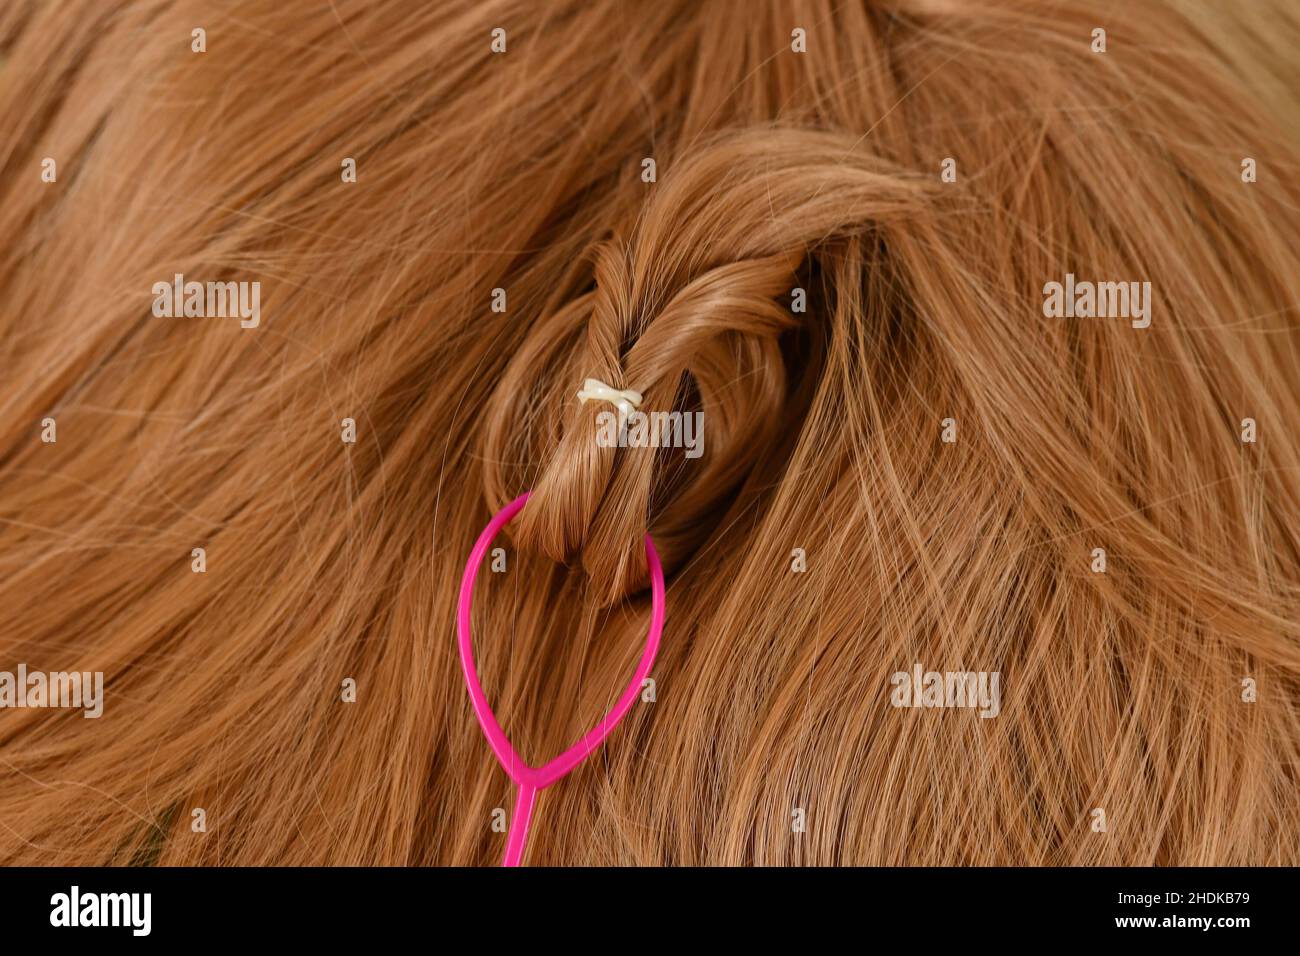 Close up of ponytail pull hair needle styling tool used on blond hair Stock Photo